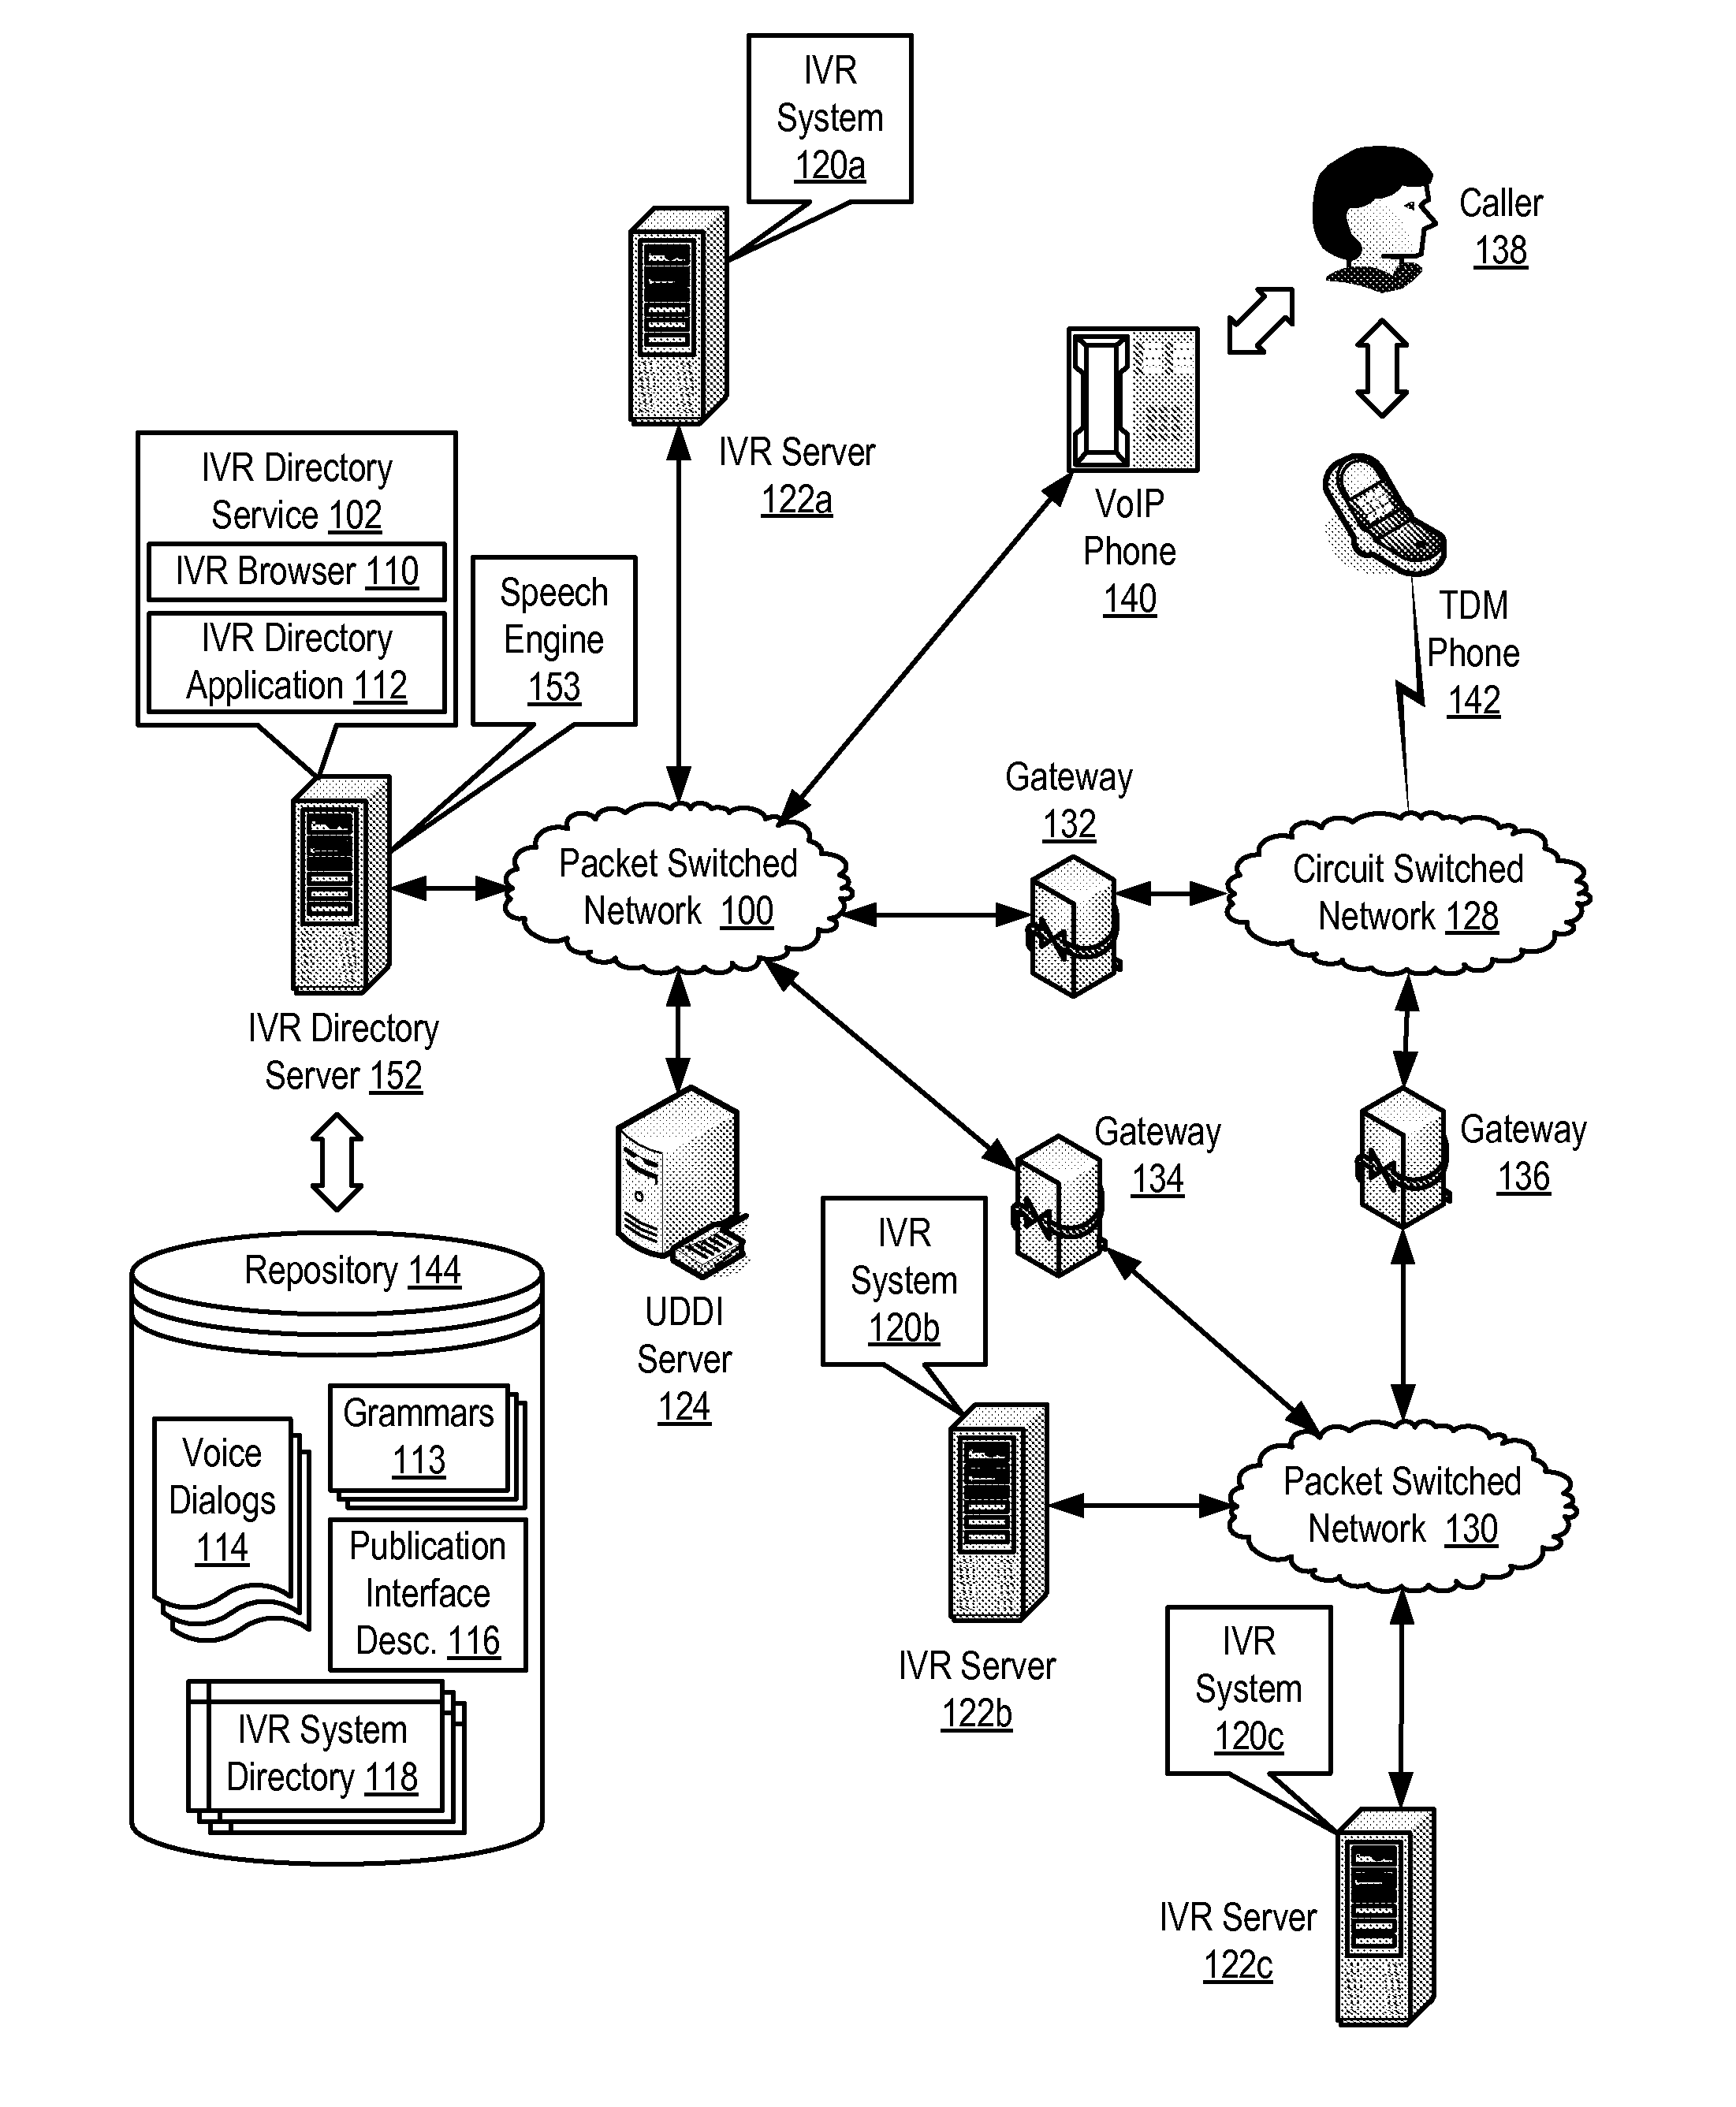 Dynamically publishing directory information for a plurality of interactive voice response systems